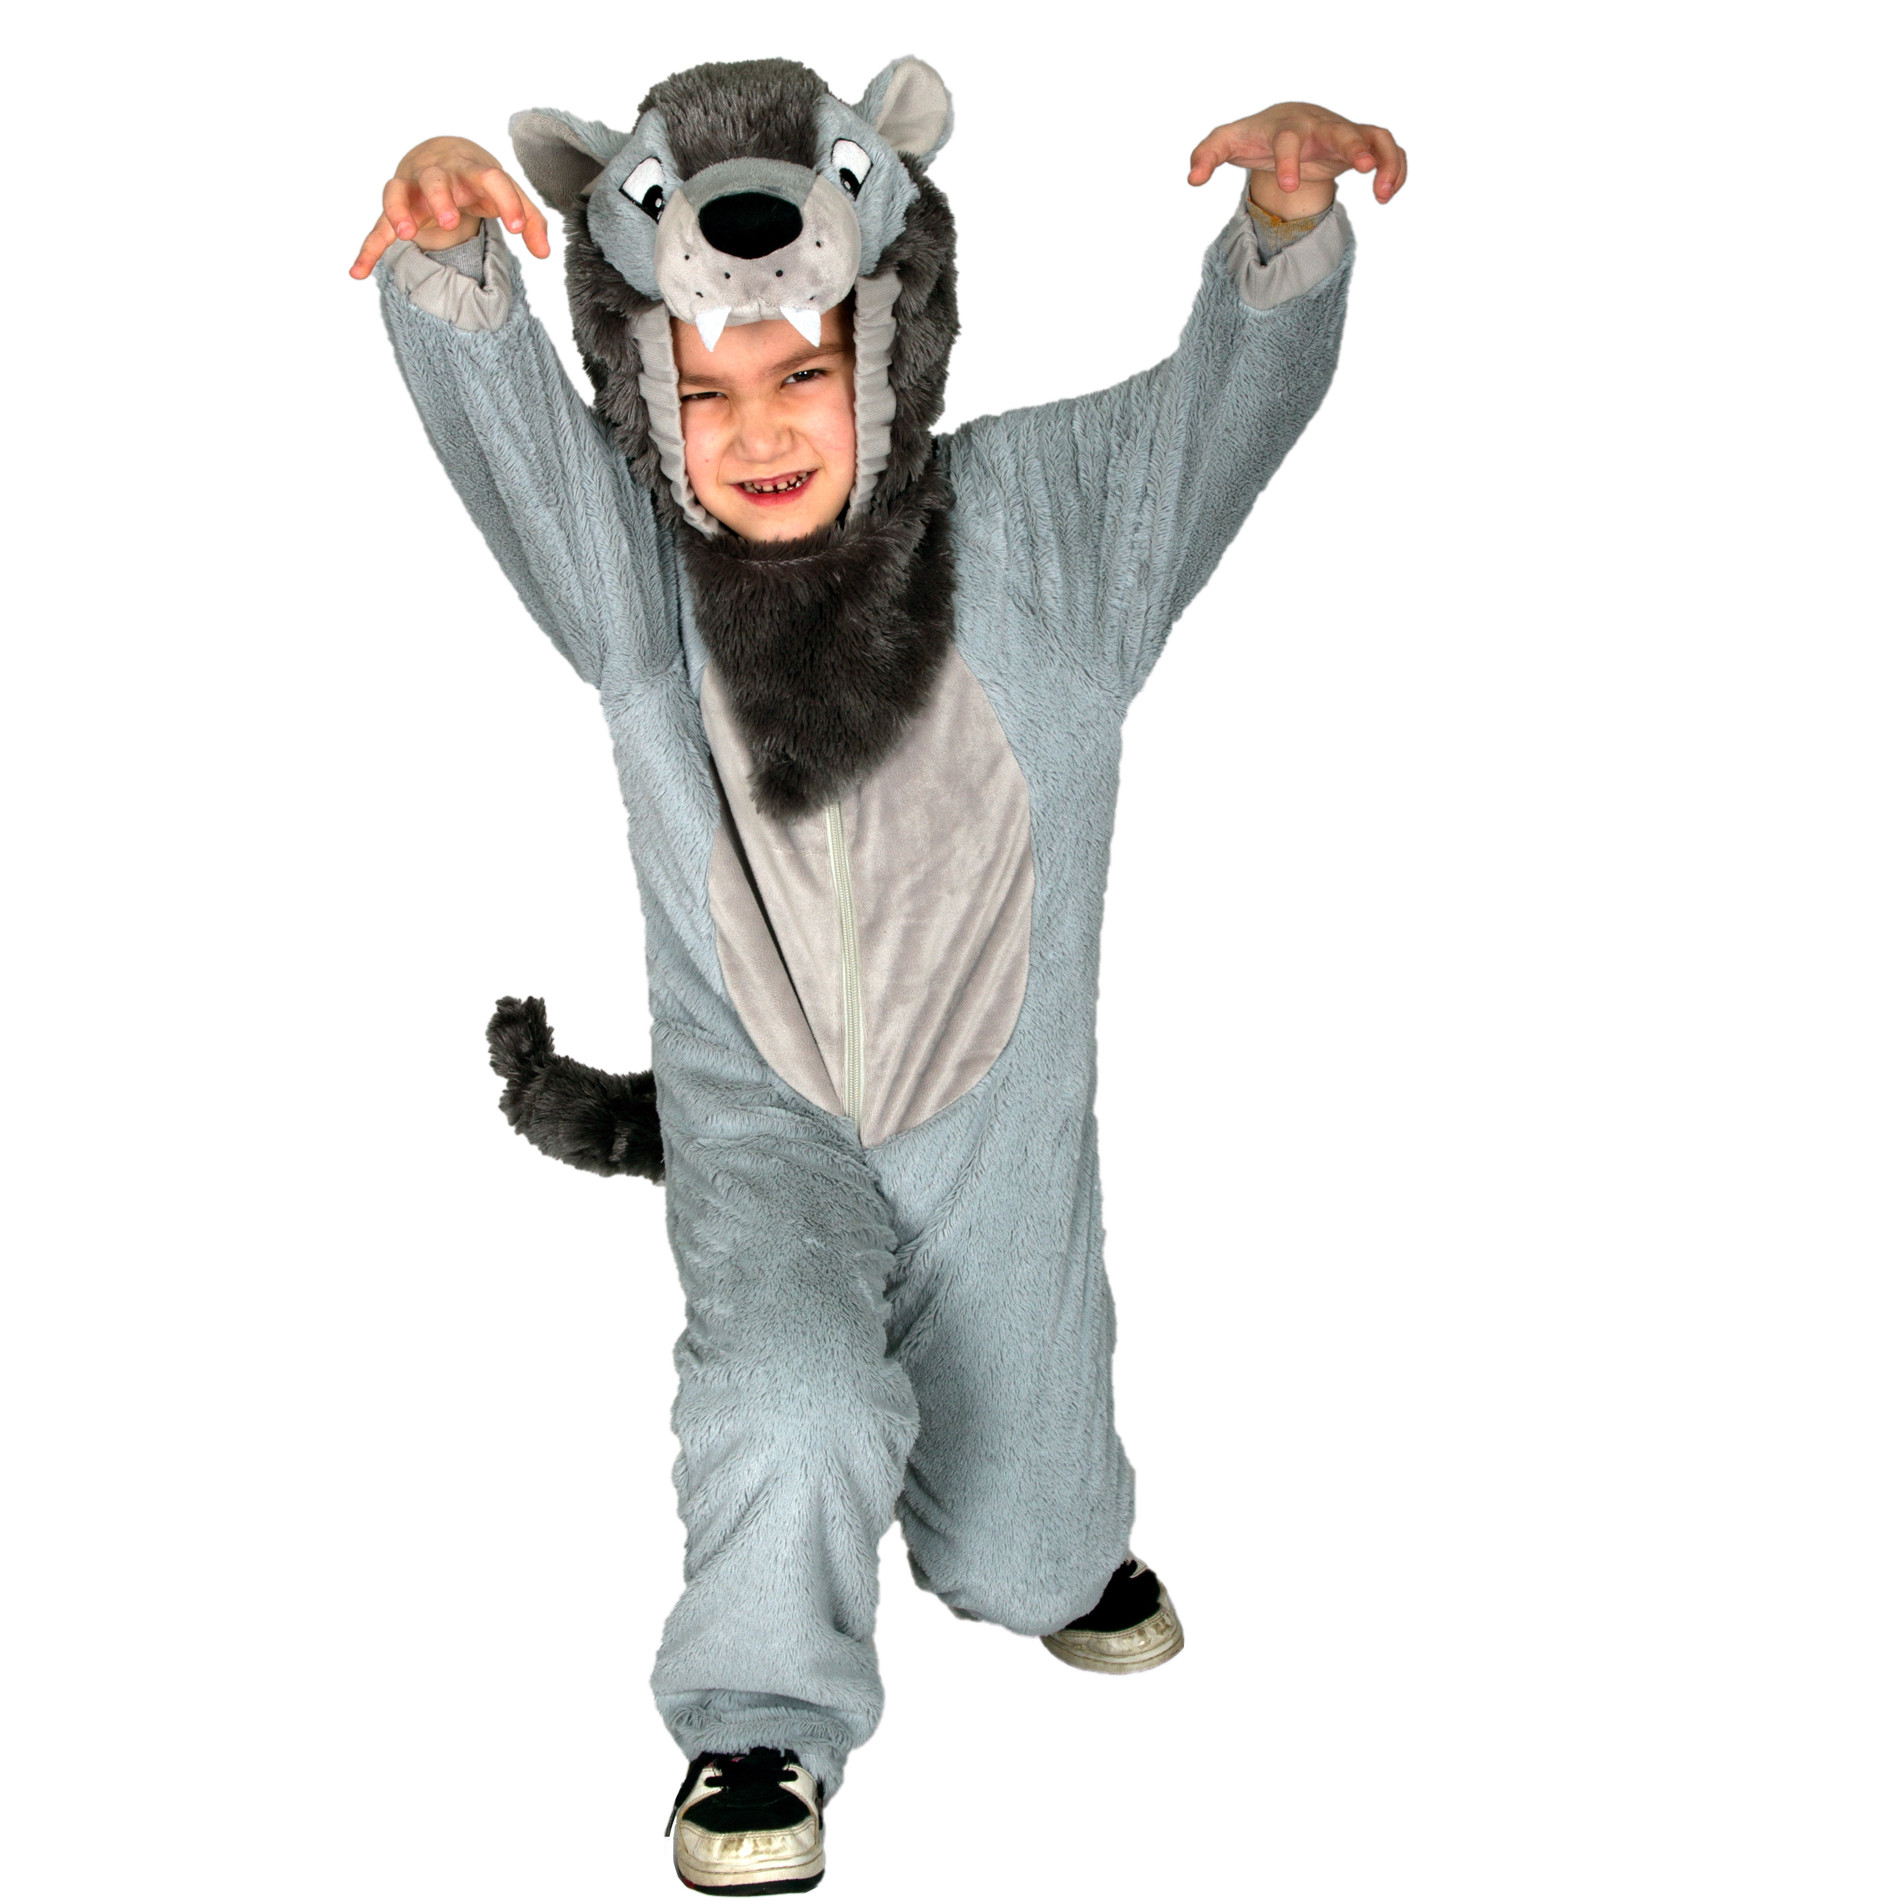 DIY Toddler Wolf Costume
 Totally Ghoul Plush Wolf Jumper Toddlers Halloween Costume